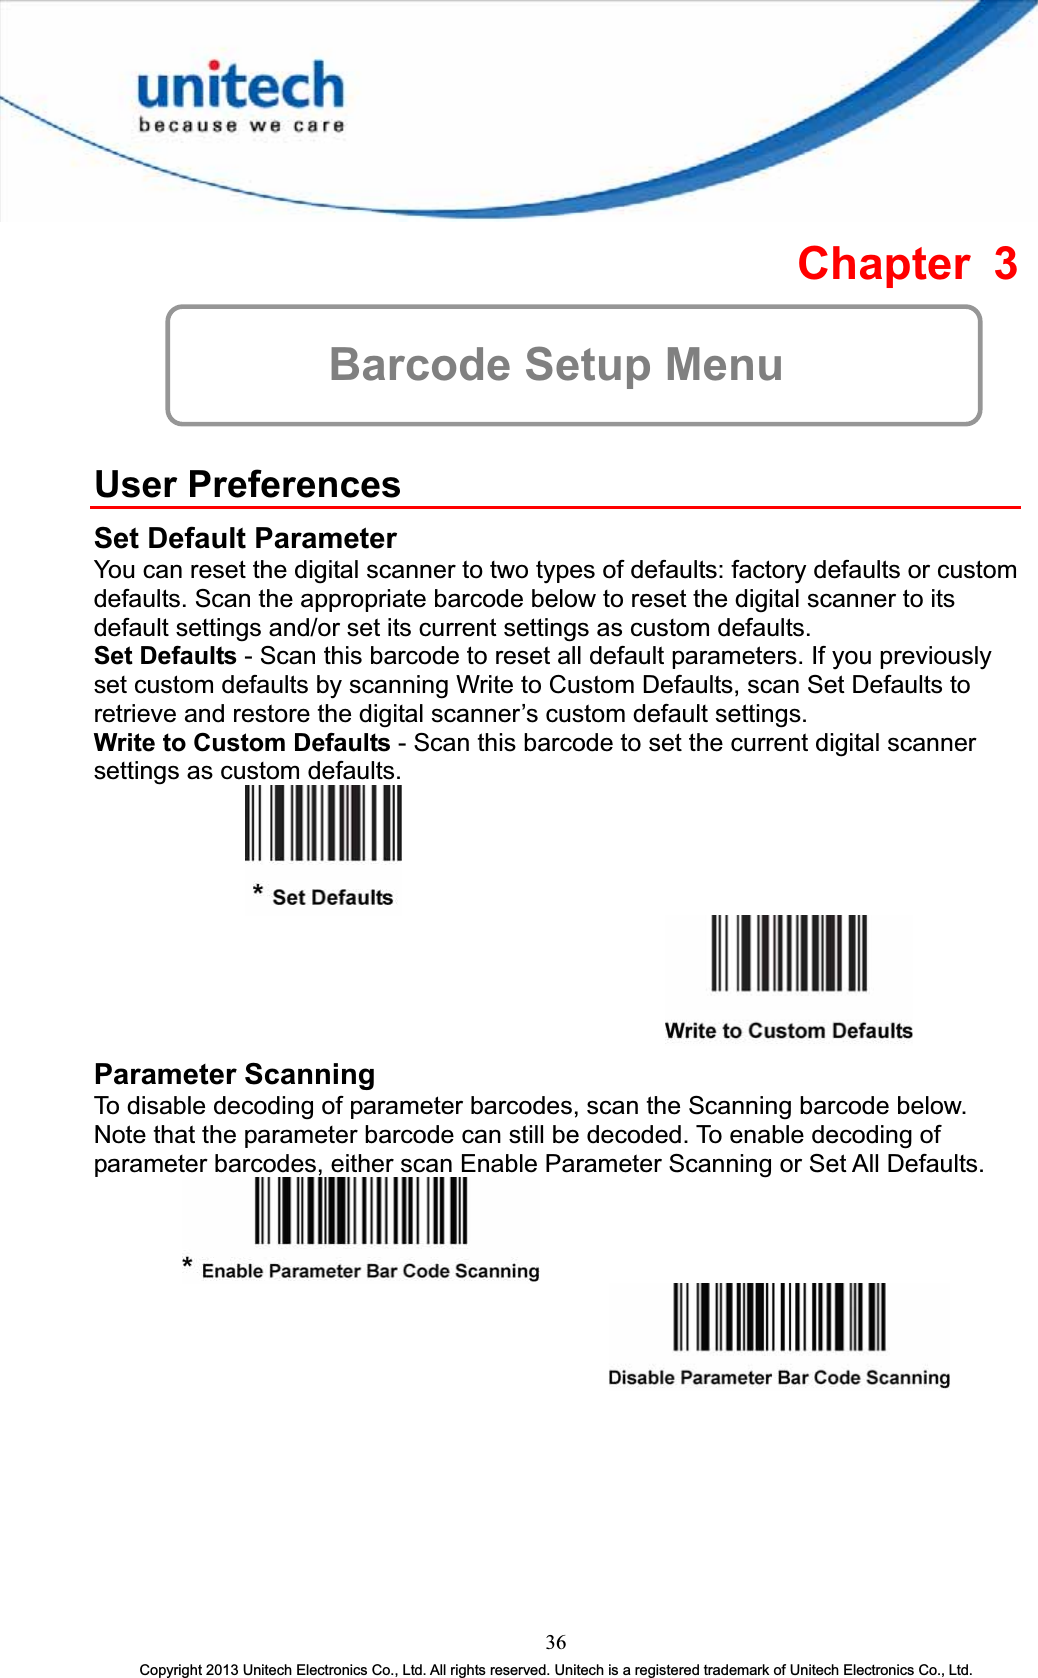 Chapter 3 Barcode Setup Menu User Preferences Set Default Parameter You can reset the digital scanner to two types of defaults: factory defaults or custom defaults. Scan the appropriate barcode below to reset the digital scanner to its default settings and/or set its current settings as custom defaults. Set Defaults - Scan this barcode to reset all default parameters. If you previously set custom defaults by scanning Write to Custom Defaults, scan Set Defaults to retrieve and restore the digital scanner’s custom default settings. Write to Custom Defaults - Scan this barcode to set the current digital scanner settings as custom defaults. Parameter Scanning To disable decoding of parameter barcodes, scan the Scanning barcode below. Note that the parameter barcode can still be decoded. To enable decoding of parameter barcodes, either scan Enable Parameter Scanning or Set All Defaults. 36Copyright 2013 Unitech Electronics Co., Ltd. All rights reserved. Unitech is a registered trademark of Unitech Electronics Co., Ltd. 